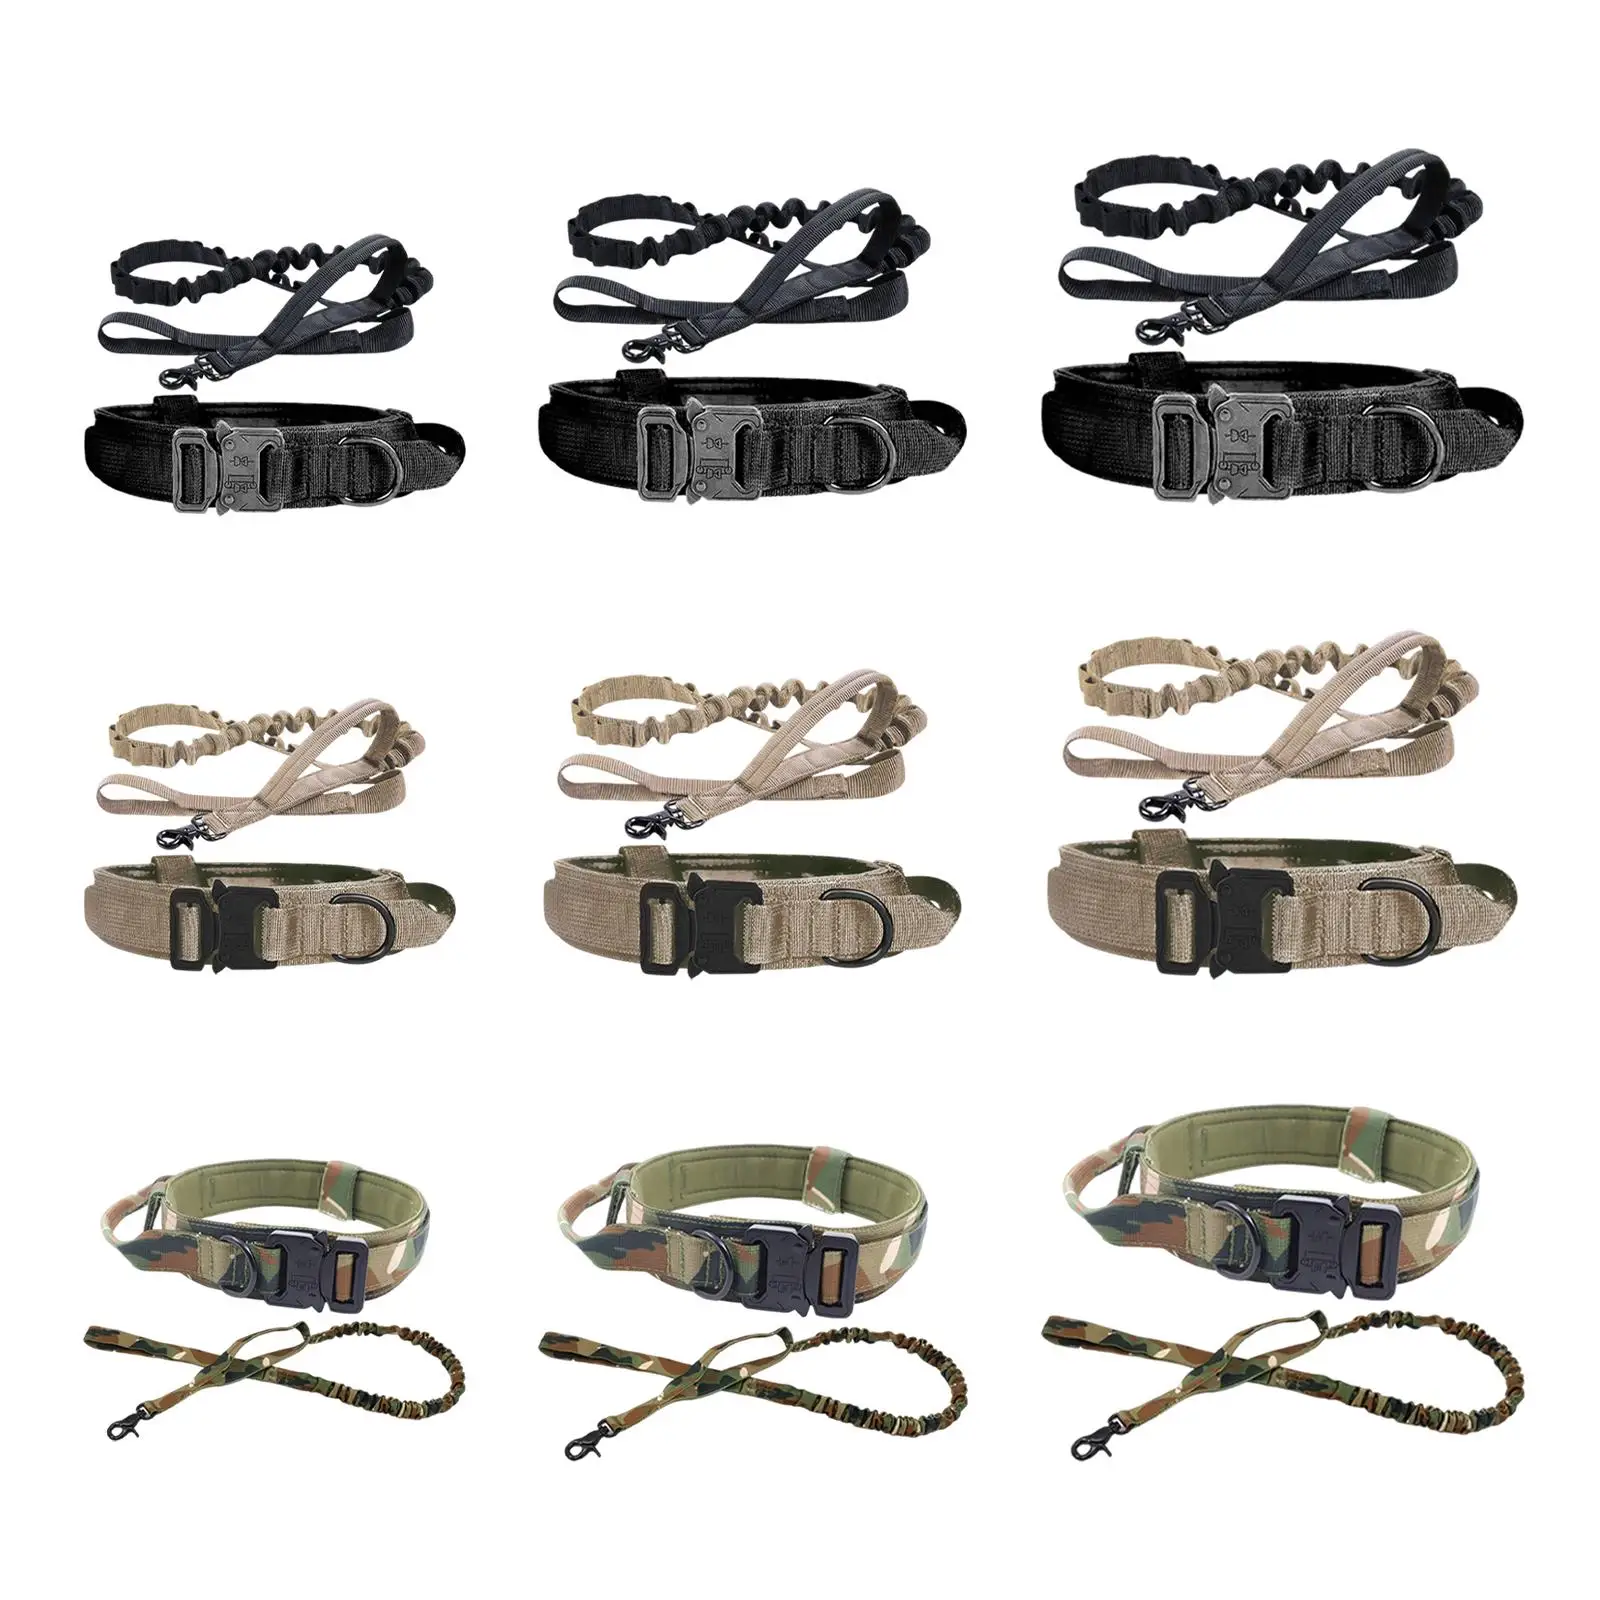 Tactical Dog Collar and Leash Set with Metal Buckle for Medium Large Dogs Adjustable with Handle Large Dog Training Collar Nylon